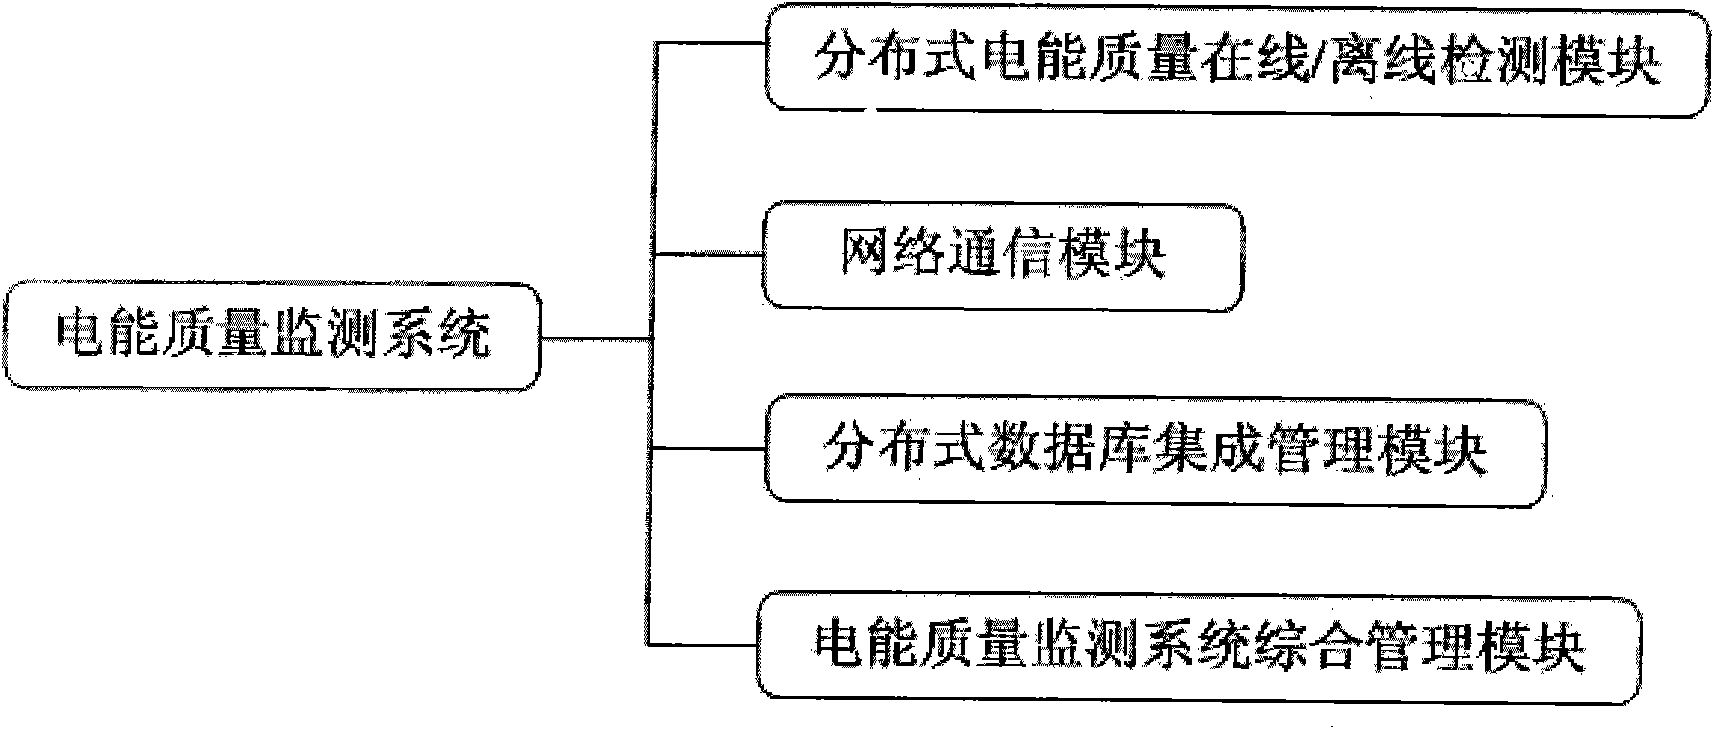 Smart grid-oriented power quality monitoring system and method